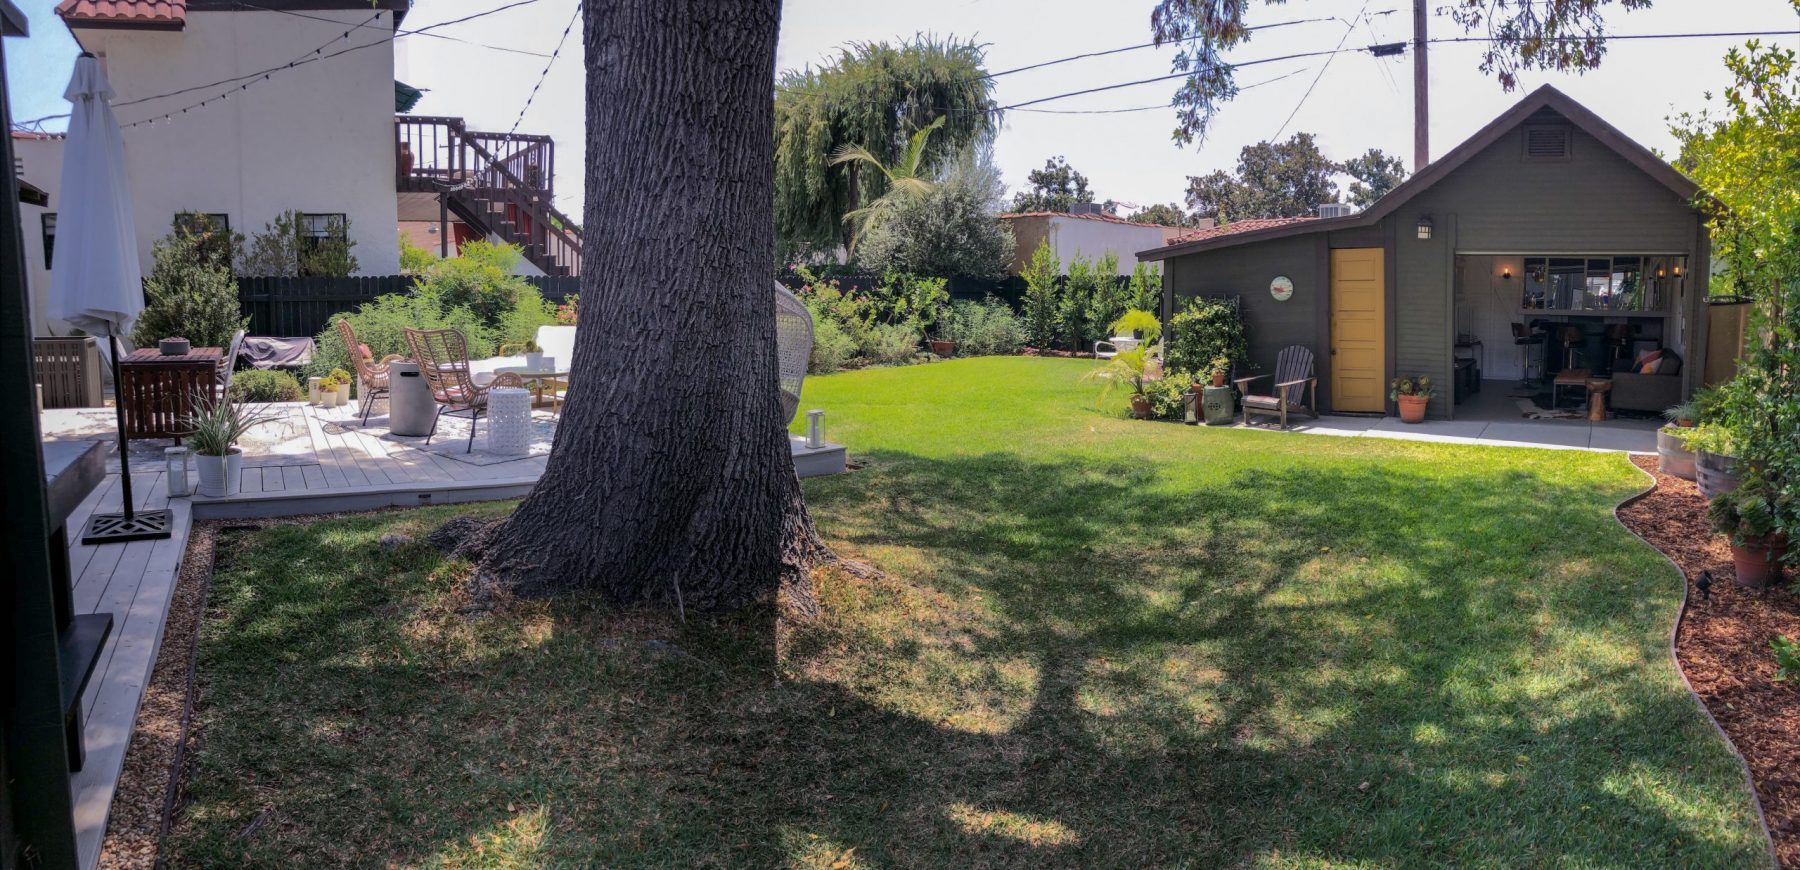 Pano from Driveway